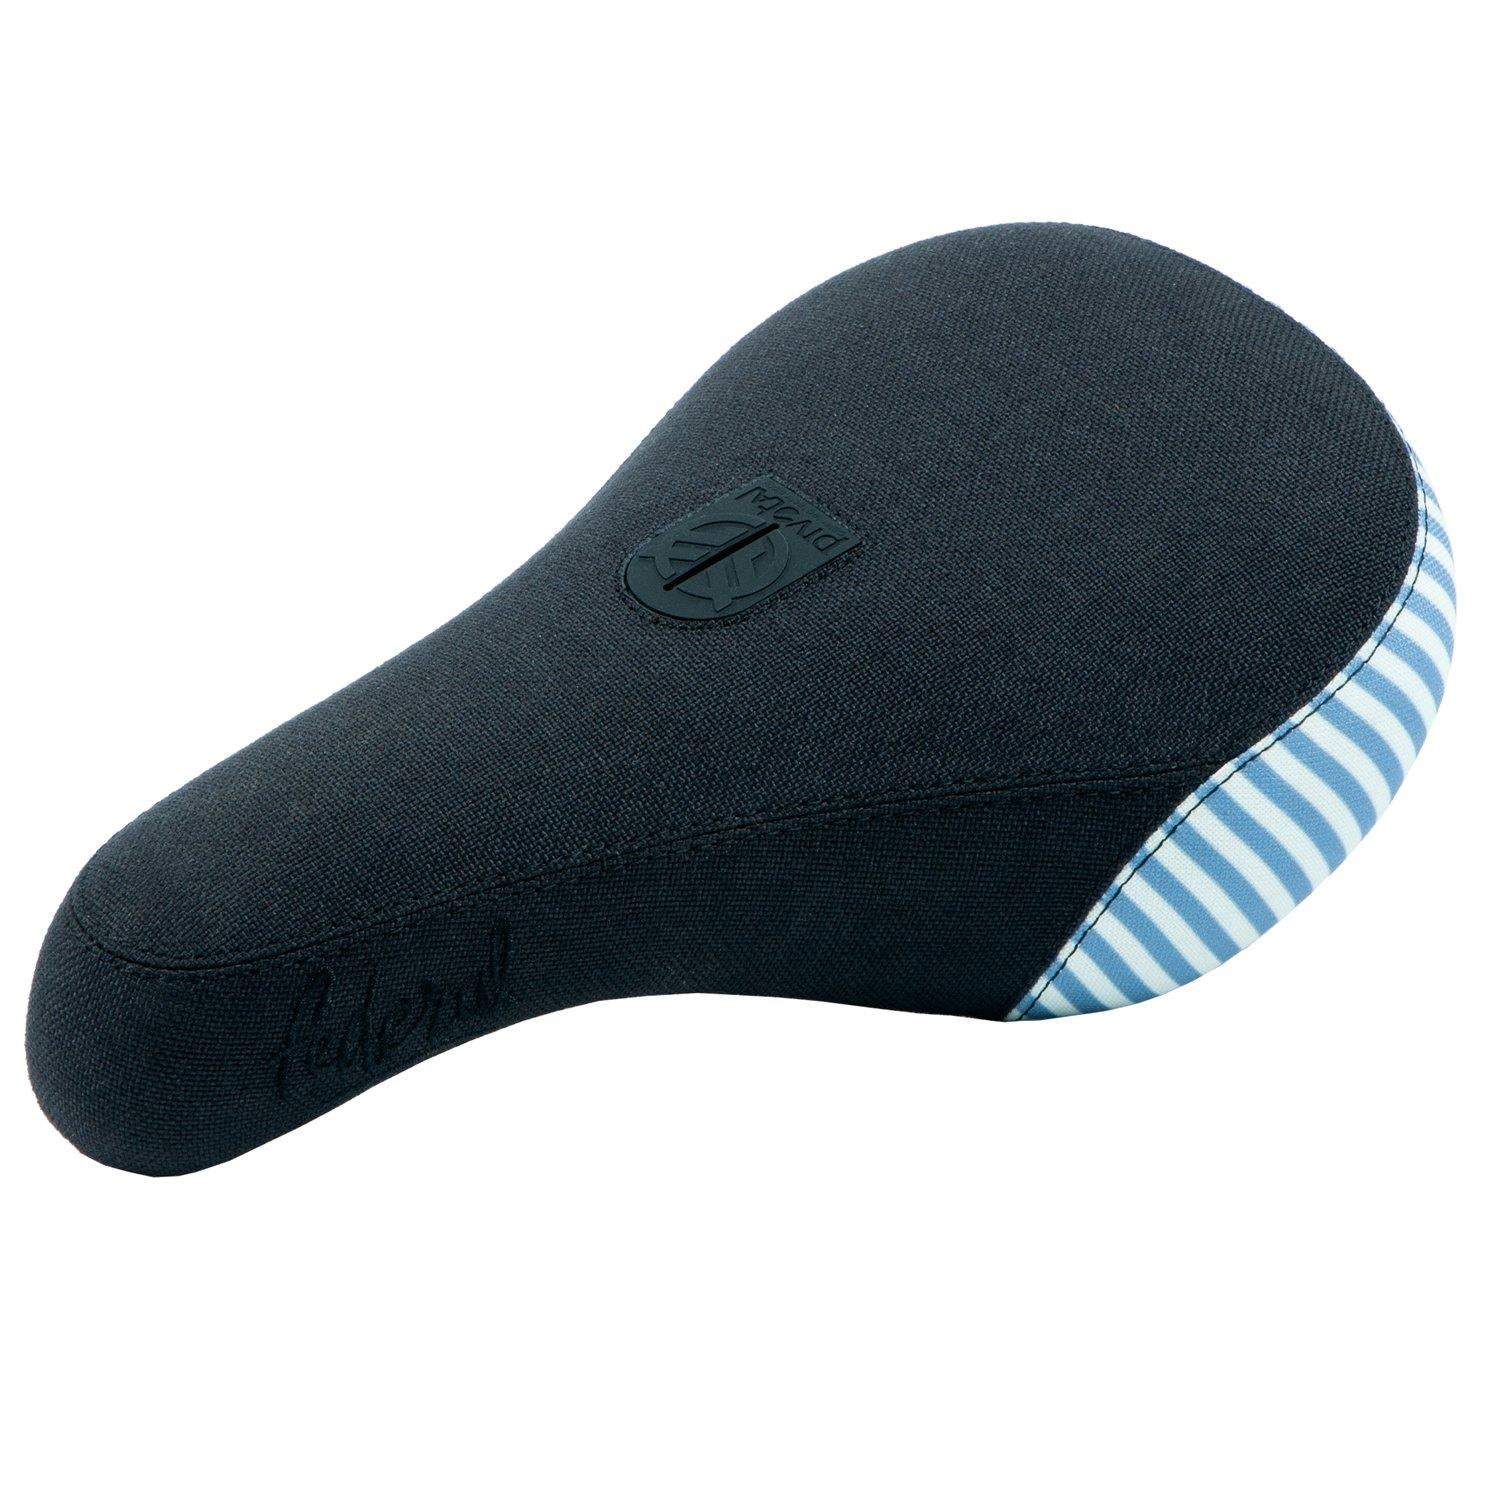 Federal Mid Pivotal Pinstripe Selle